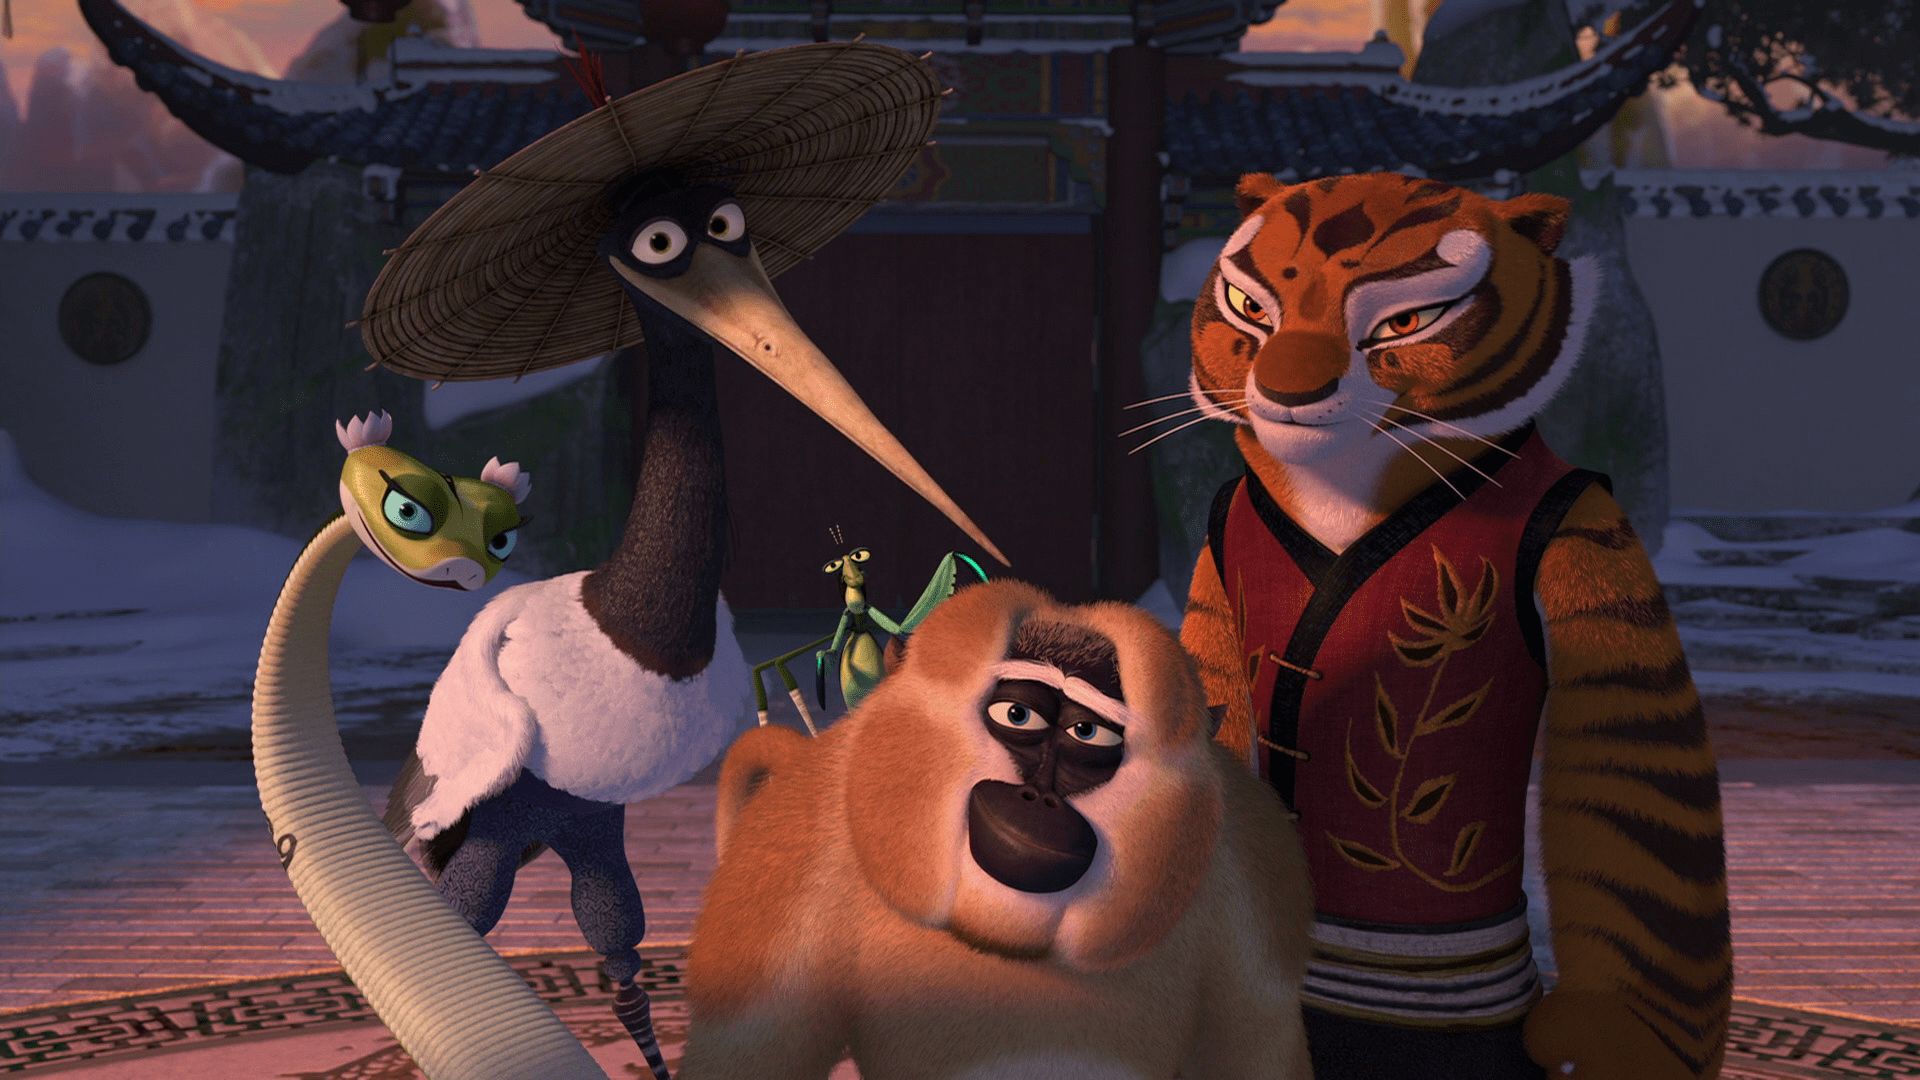 5 Reasons Po Is Ready for Action in Kung Fu Panda 4